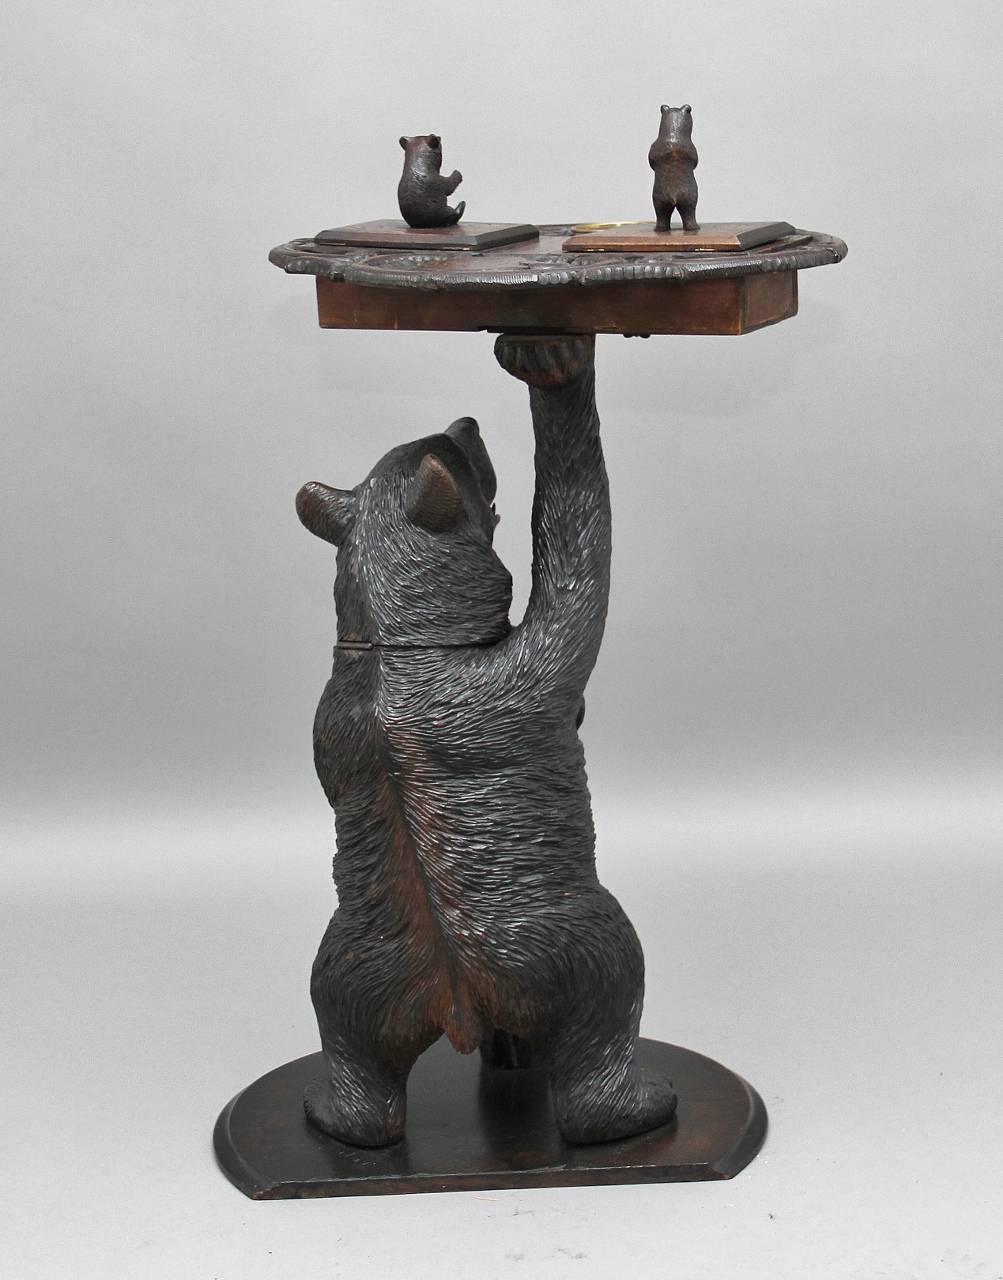 19th century musical Black Forest smokers stand, a fabulous quality item of a bear standing on a base leaning on a tree trunk, his other arm supporting a stylized tray with two small bears, one sitting on a lid which opens to reveal compartment, the